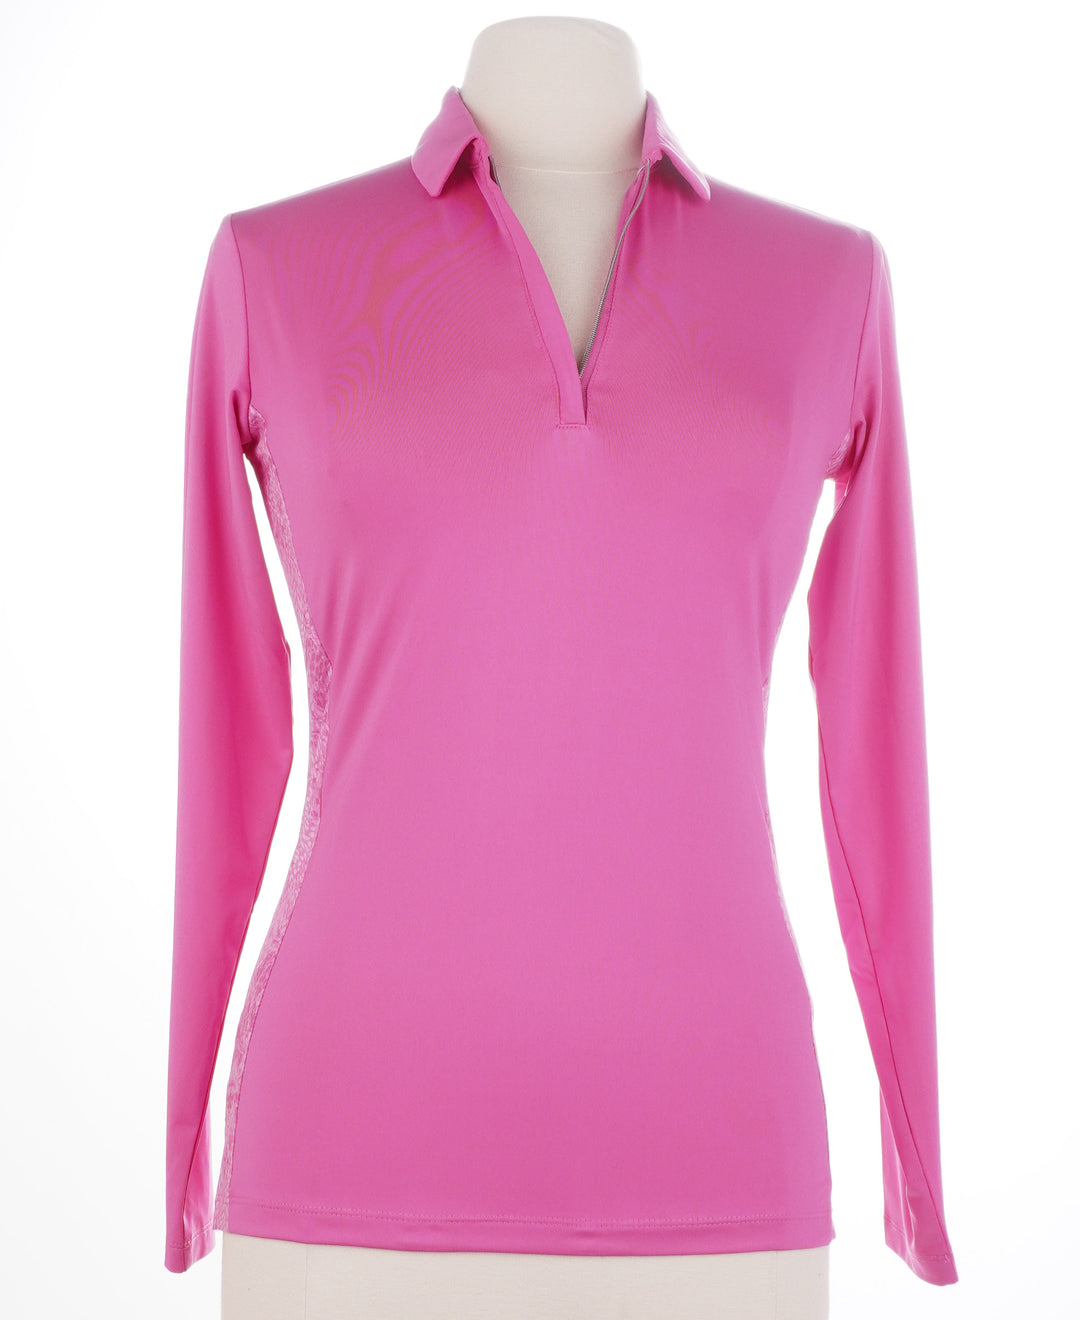 Dunning Golf Chloe Jersey Performance Long Sleeve - Lily - Size Small - Skorzie